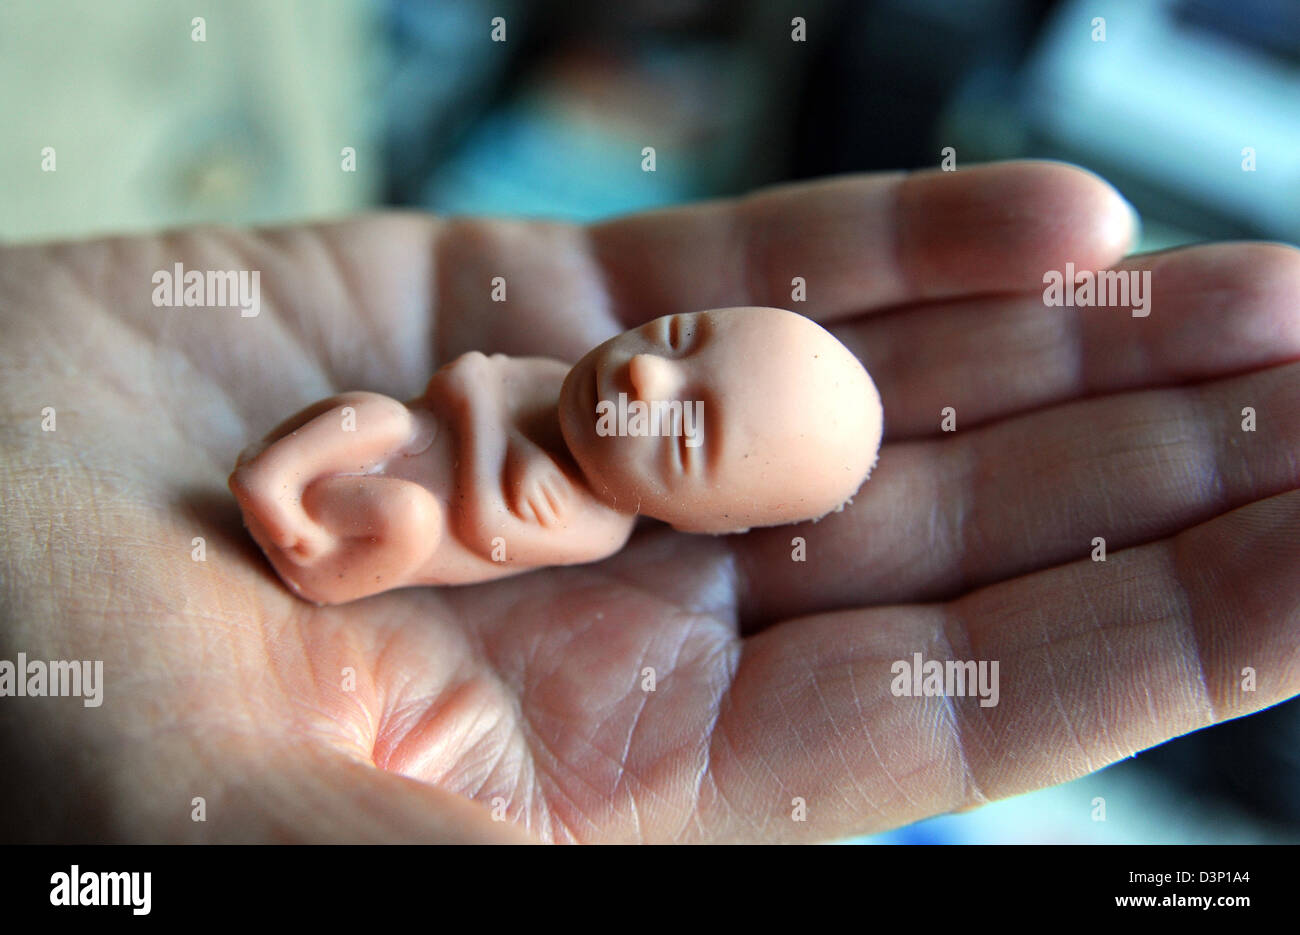 Tiny baby foetus doll held in palm of hand used by anti abortion campaigners Stock Photo